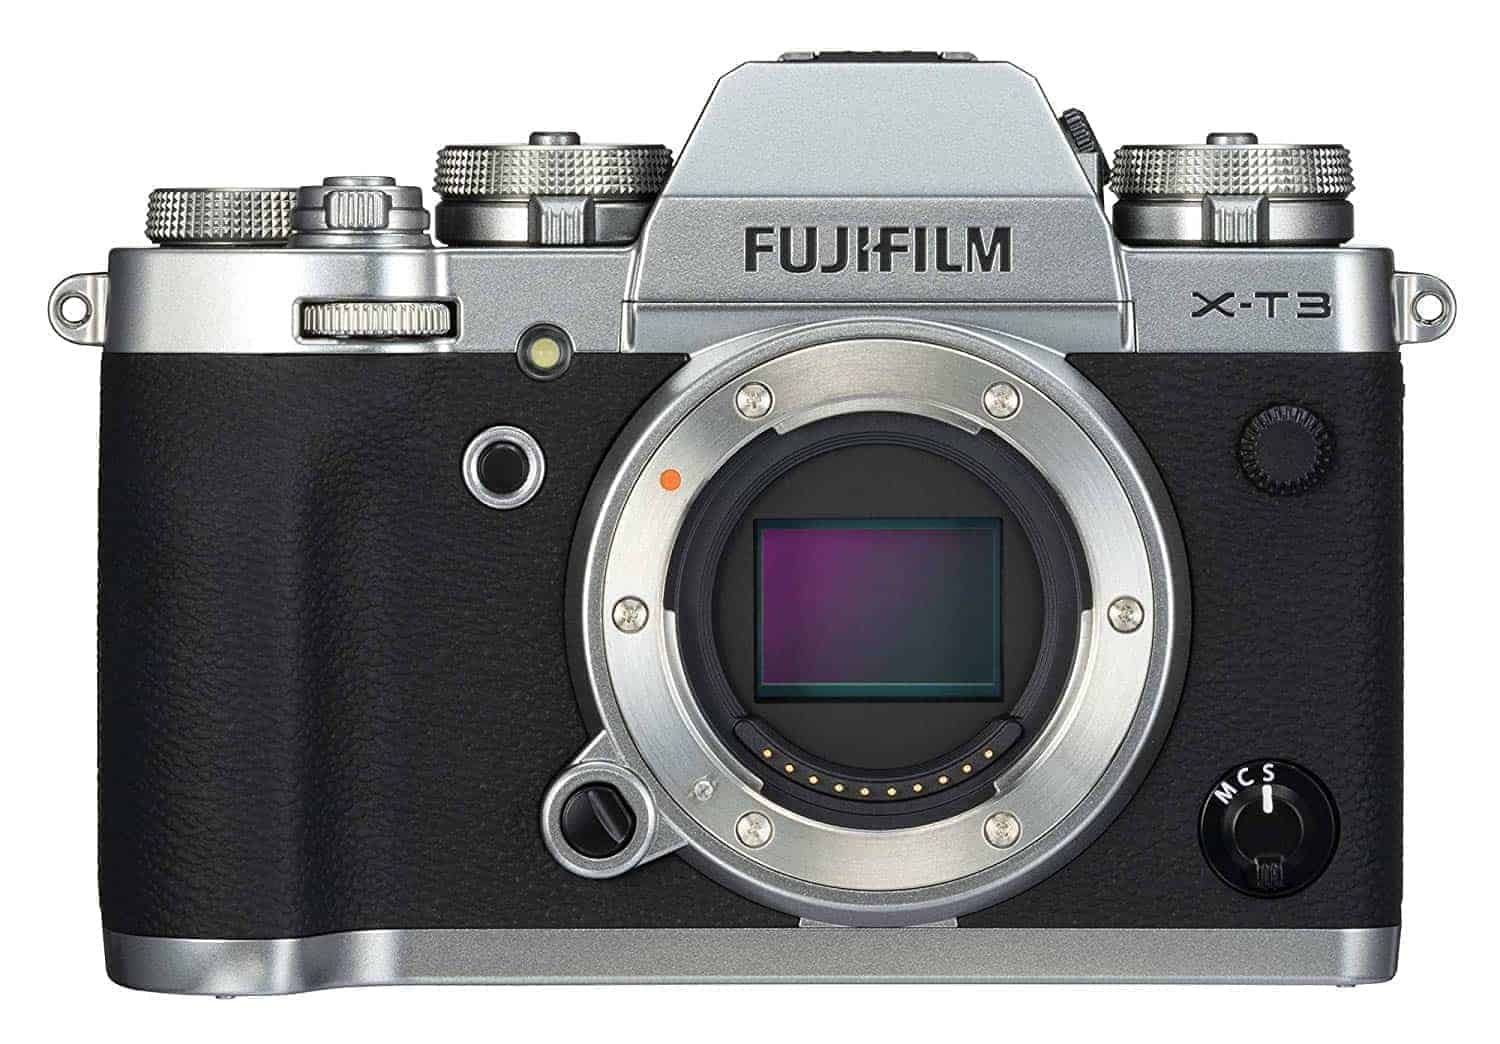 bout Omgeving Supersonische snelheid Fujifilm X-T3 Mirrorless Camera: First impressions from a GH5 video shooter  | Stark Insider